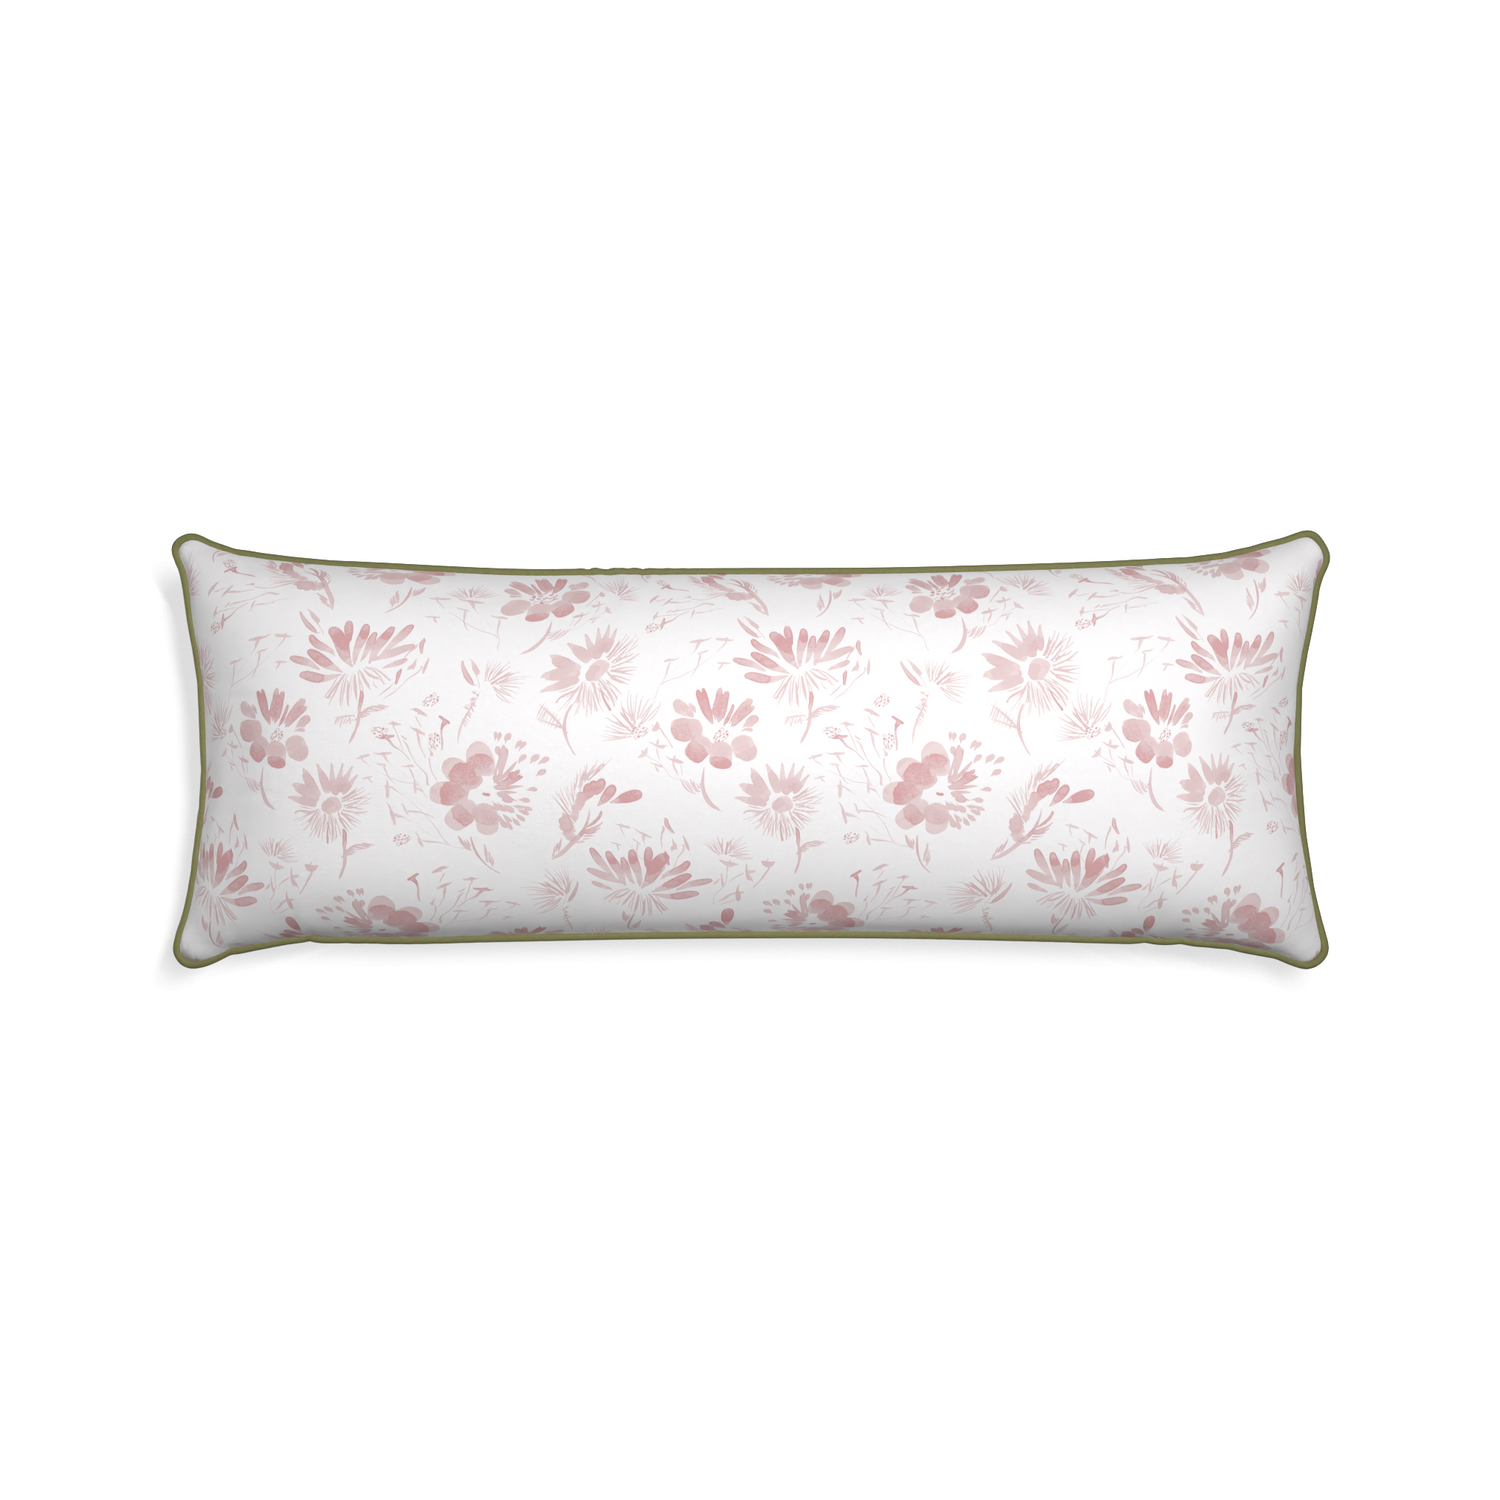 Xl-lumbar blake custom pillow with moss piping on white background